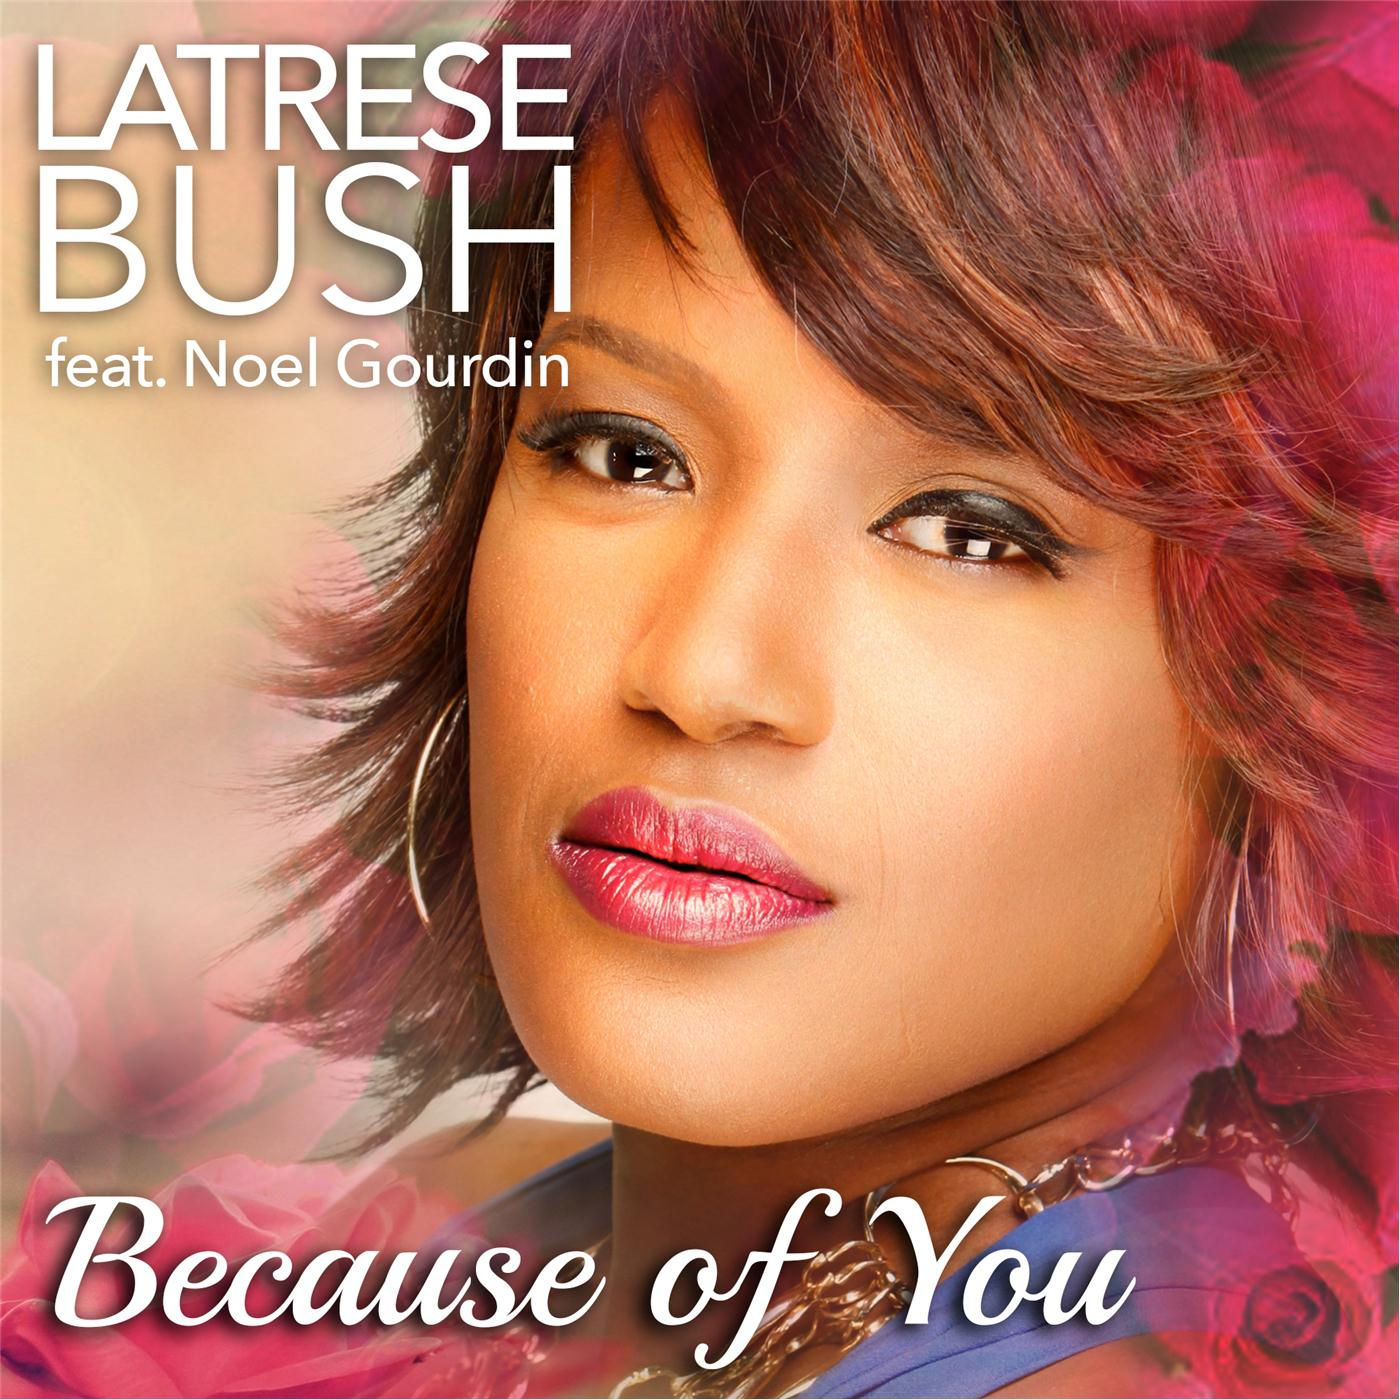 New Music: Latrese Bush "Because of You" featuring Noel Gourdin